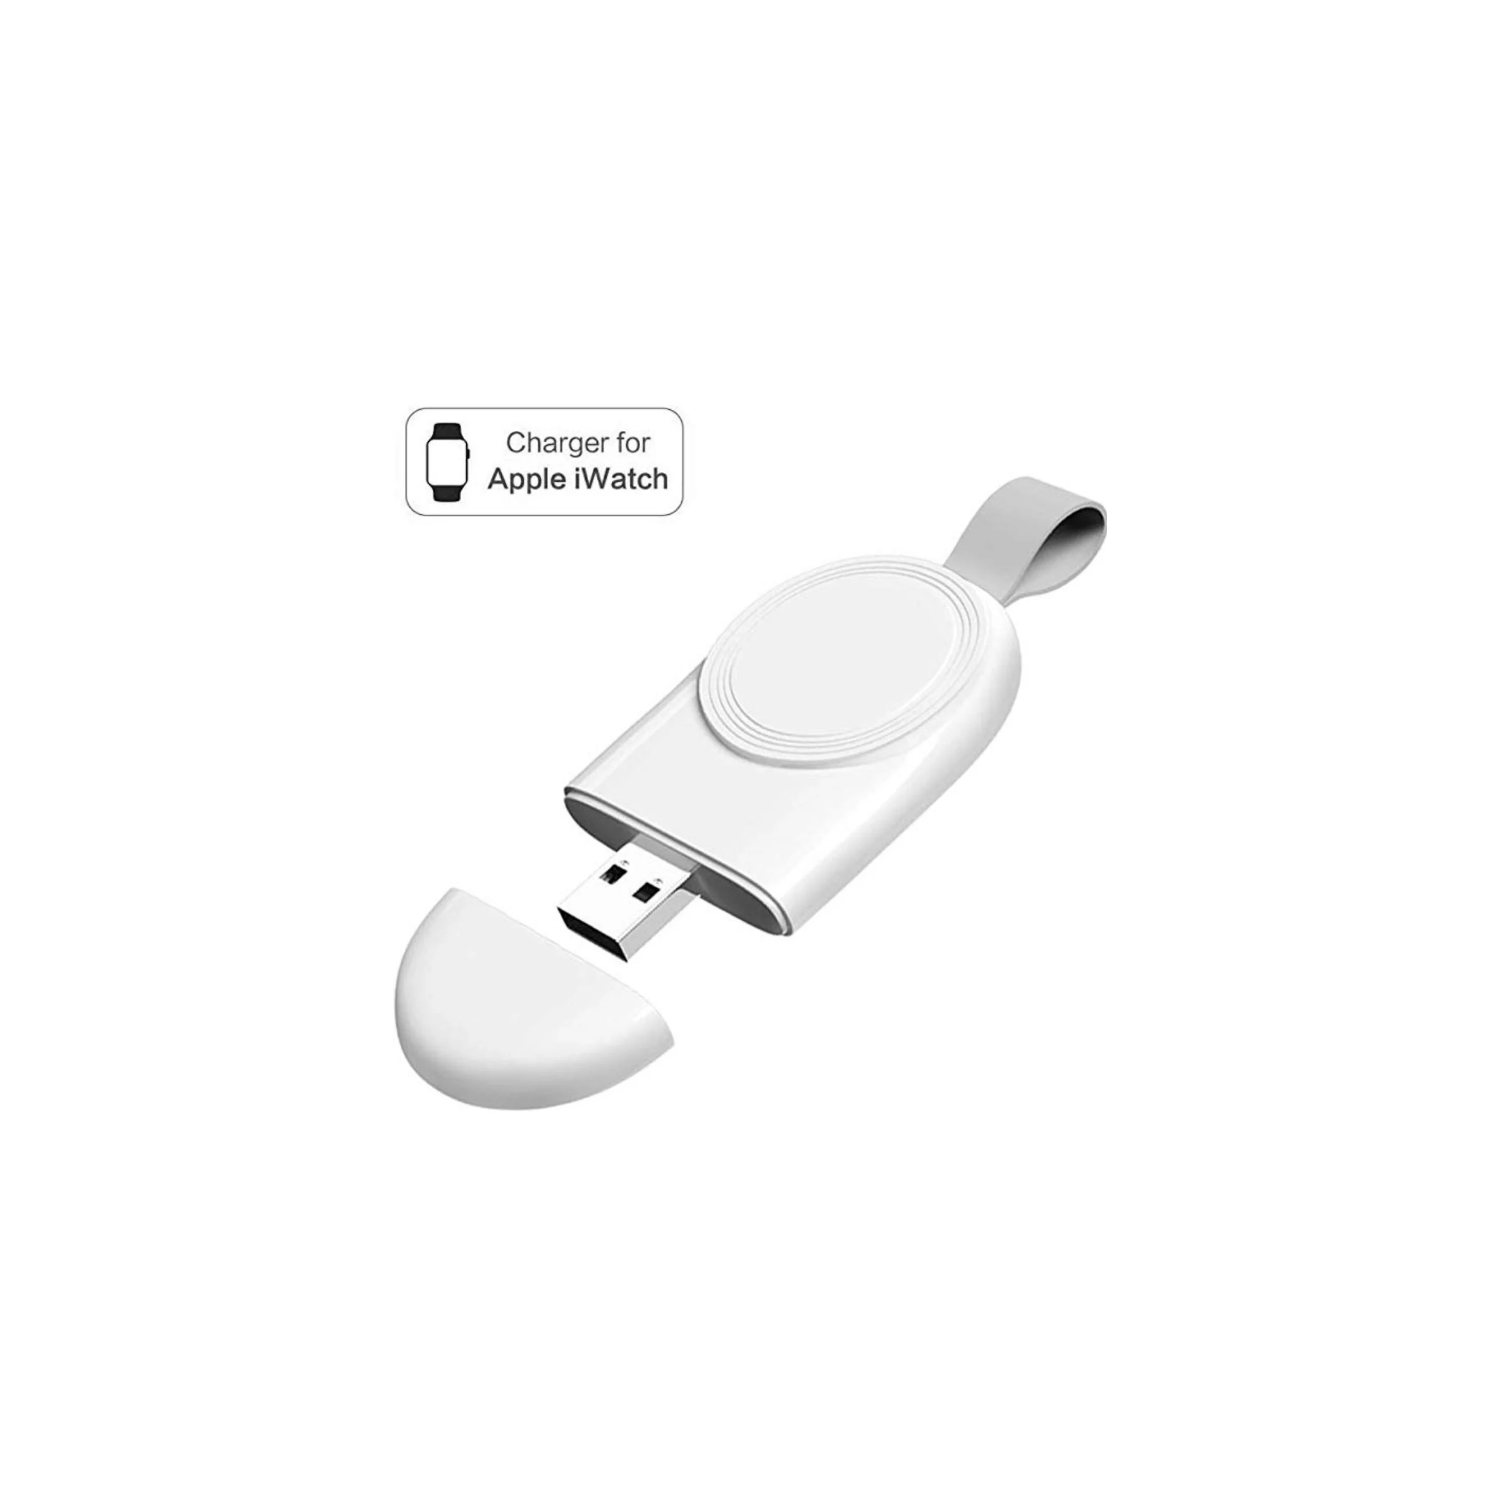 Magnetic Portable Wireless iWatch Charger - Apple Watch charger with string USB-A input:AC 5V 1A White For Apple Watch iWatch Series 6 5 4 3 2 1